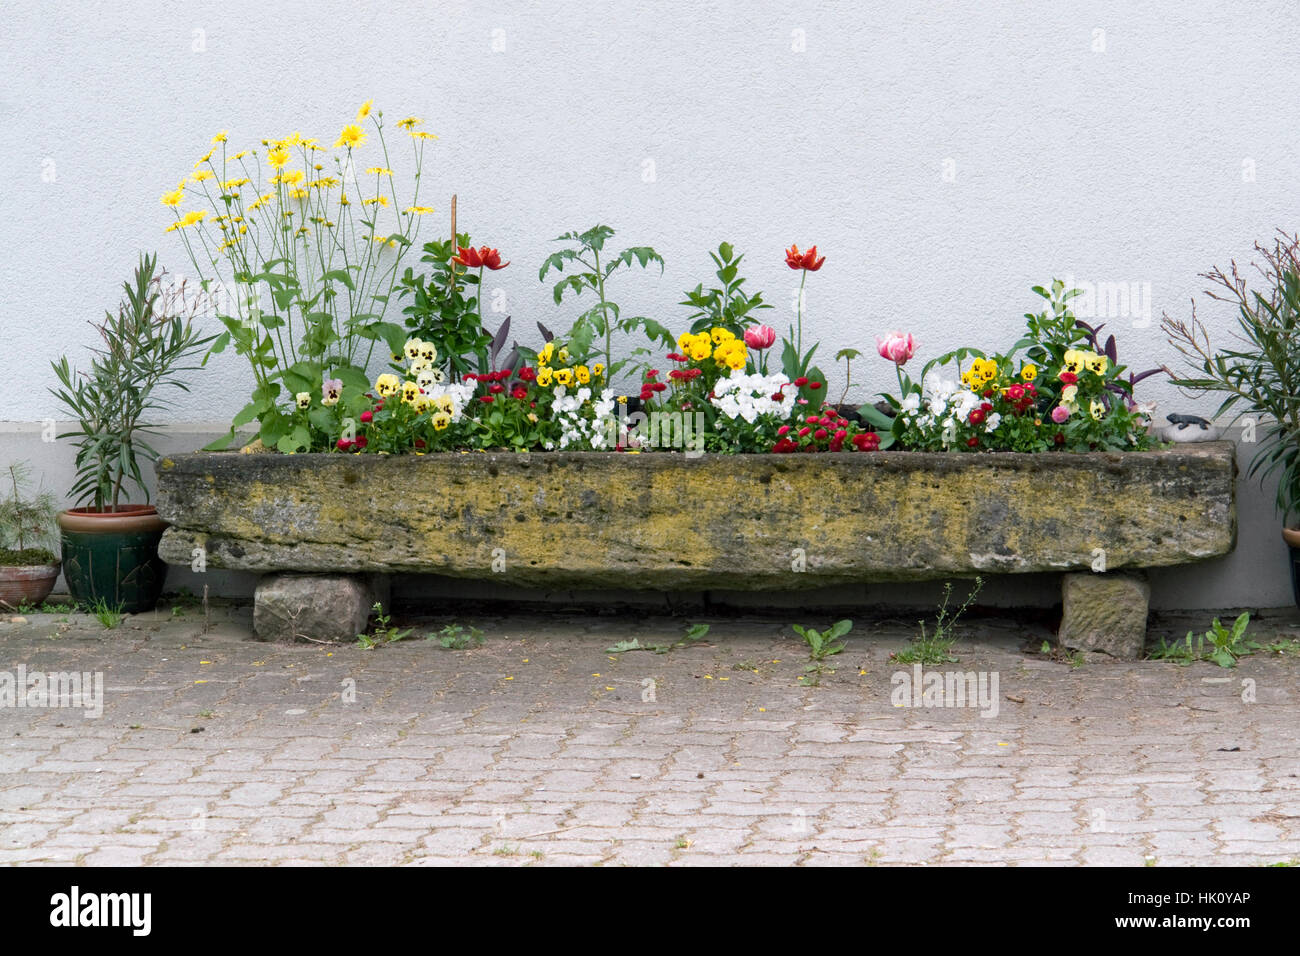 Bathtub placed in countryside and used as spring water trough, exilles,  Italy Stock Photo - Alamy